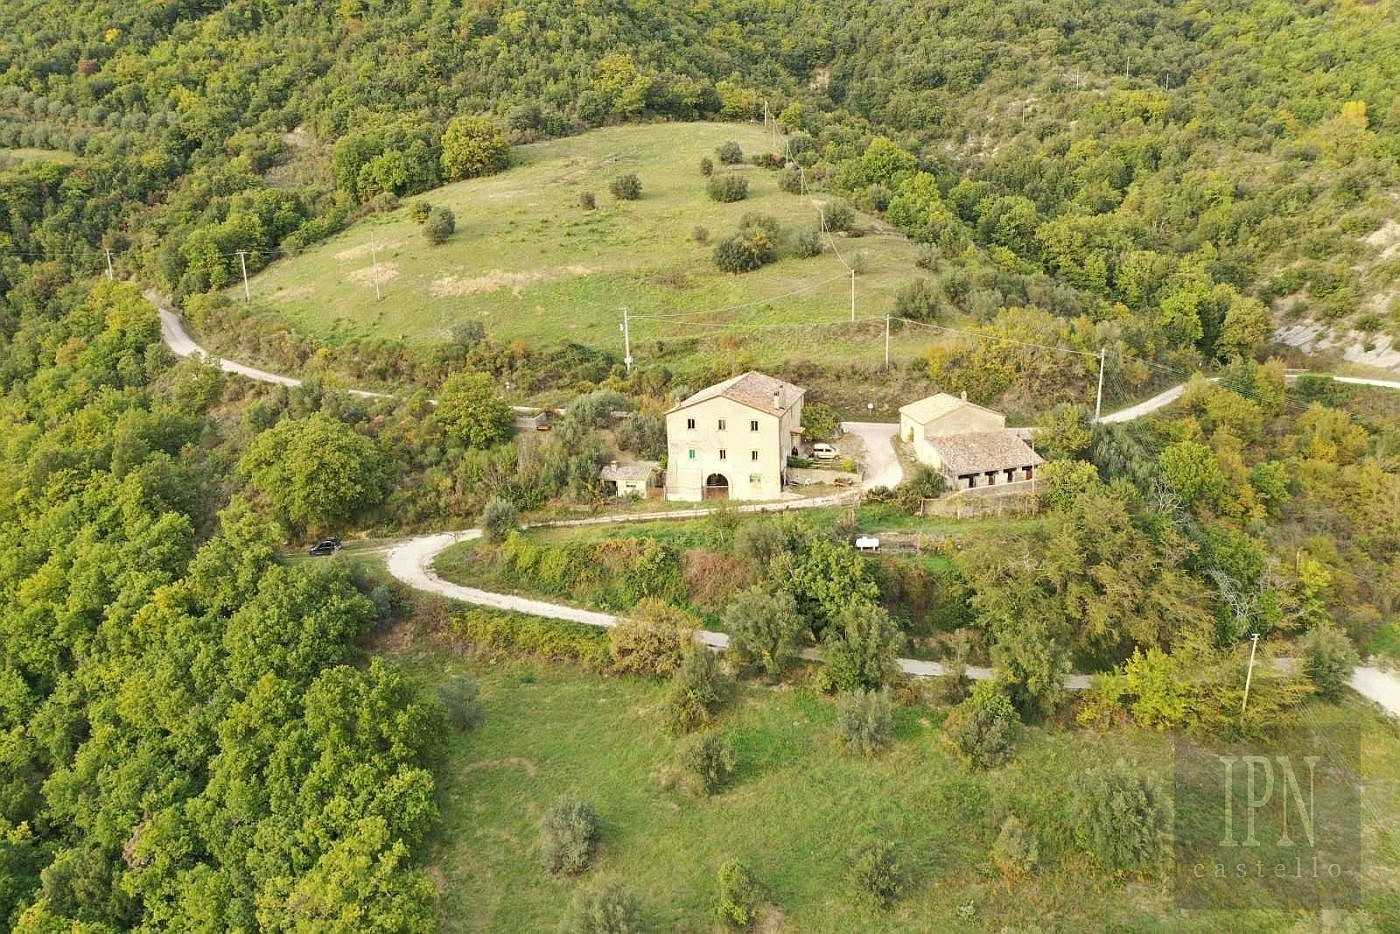 Photos Farmhouse with view of ancient castle ruins in Umbria